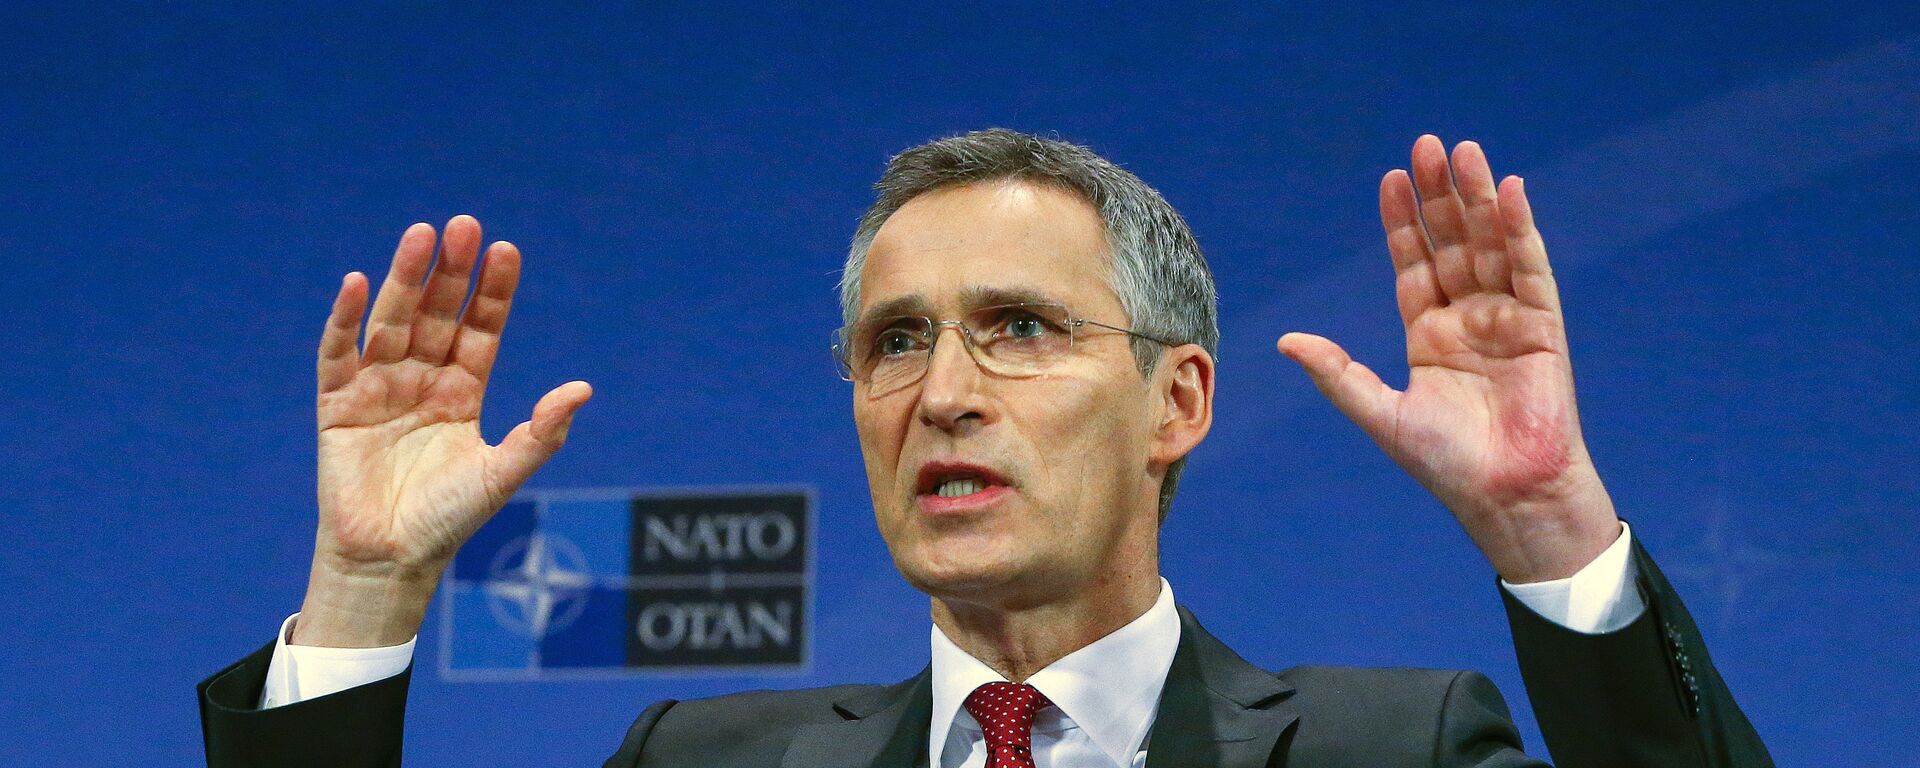 NATO Secretary-General Jens Stoltenberg gestures during a news conference ahead of a NATO defense ministers meeting, which will be held on February 10-11, at the Alliance's headquarters in Brussels, Belgium February 9, 2016. - Sputnik Việt Nam, 1920, 13.03.2022